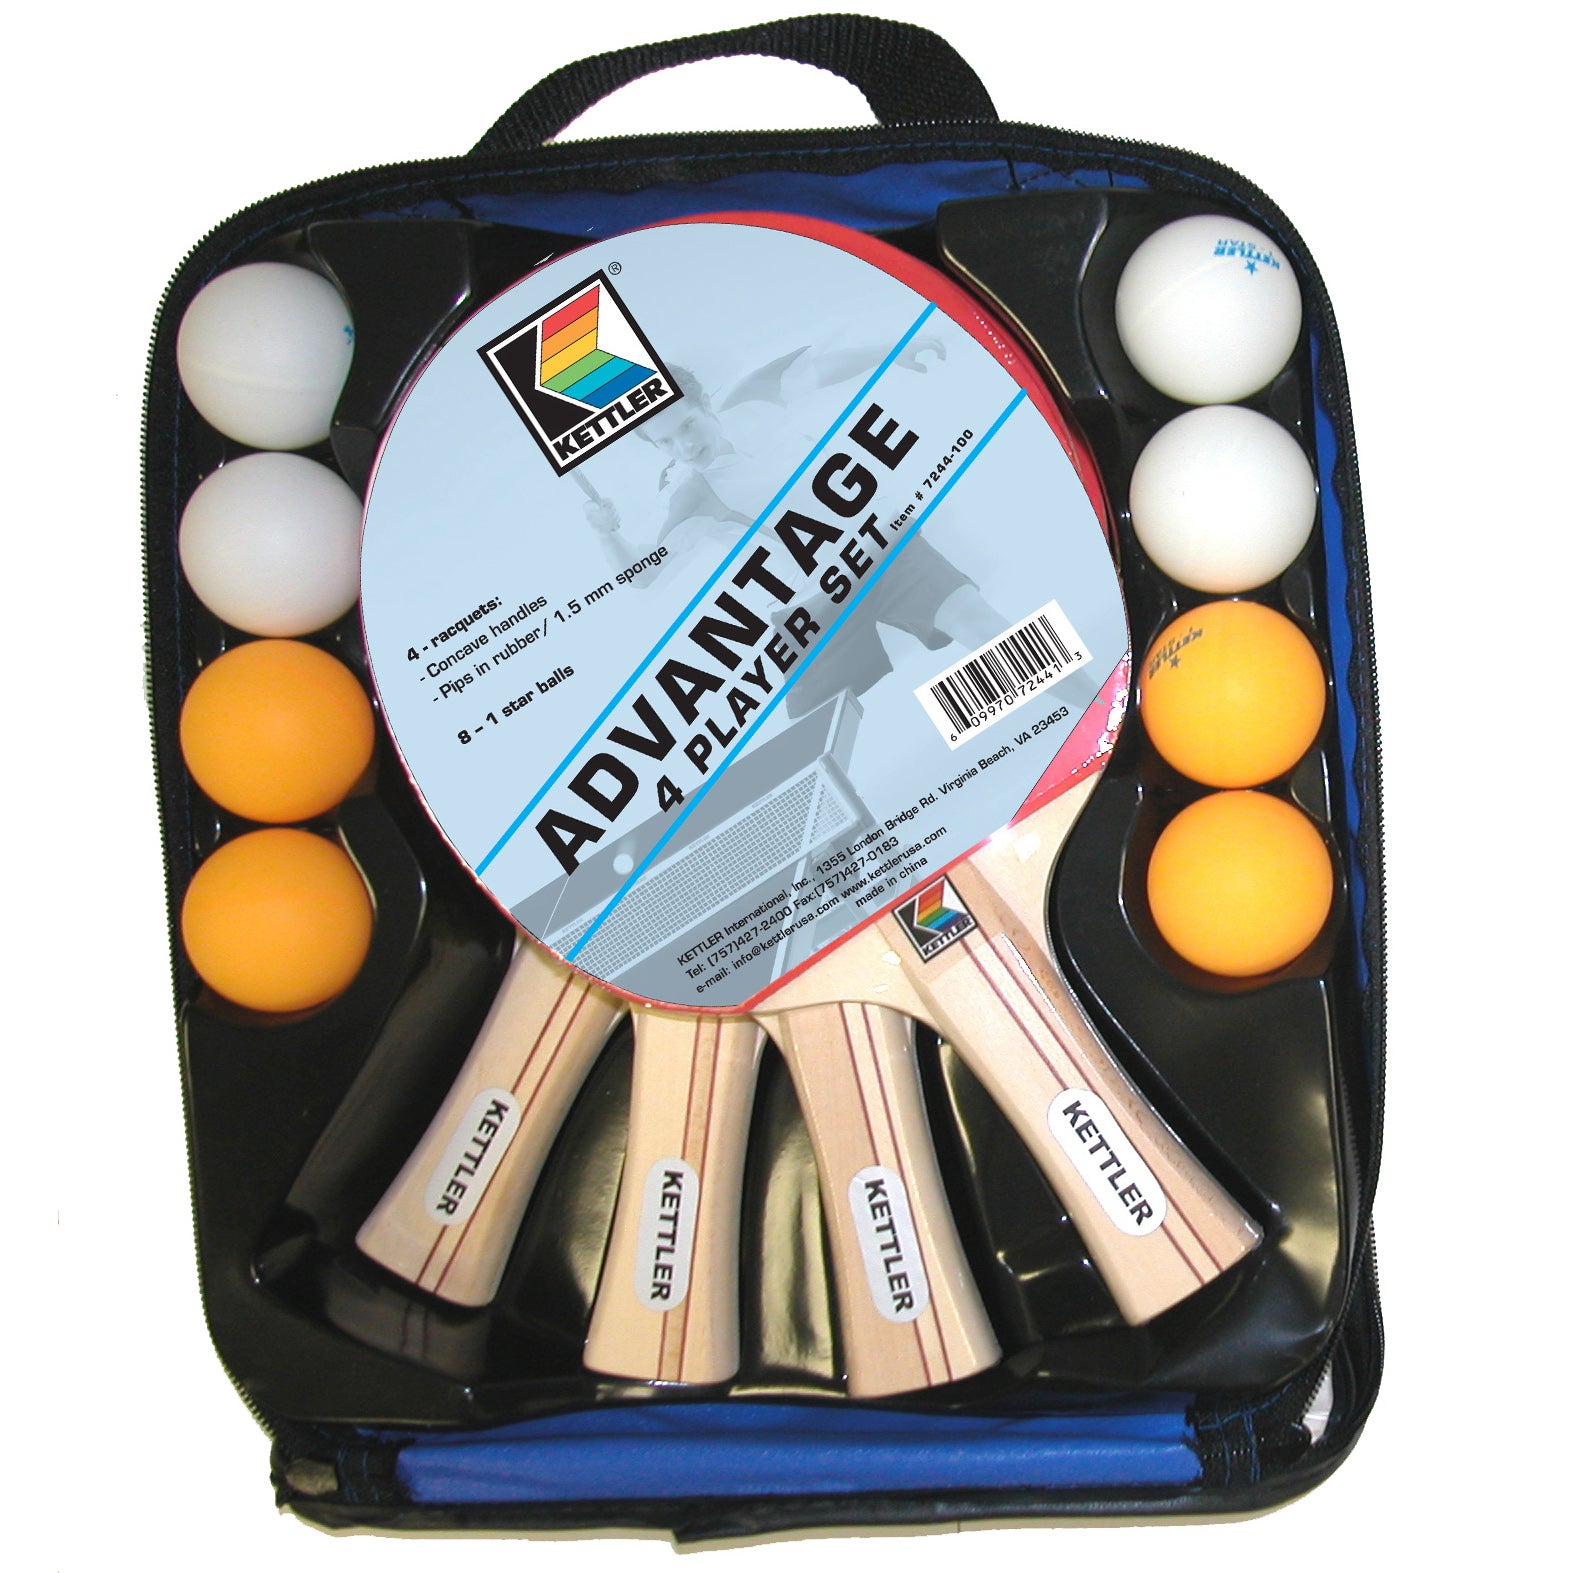 4 Player advantage table tennis kit with 8 balls and carrying case